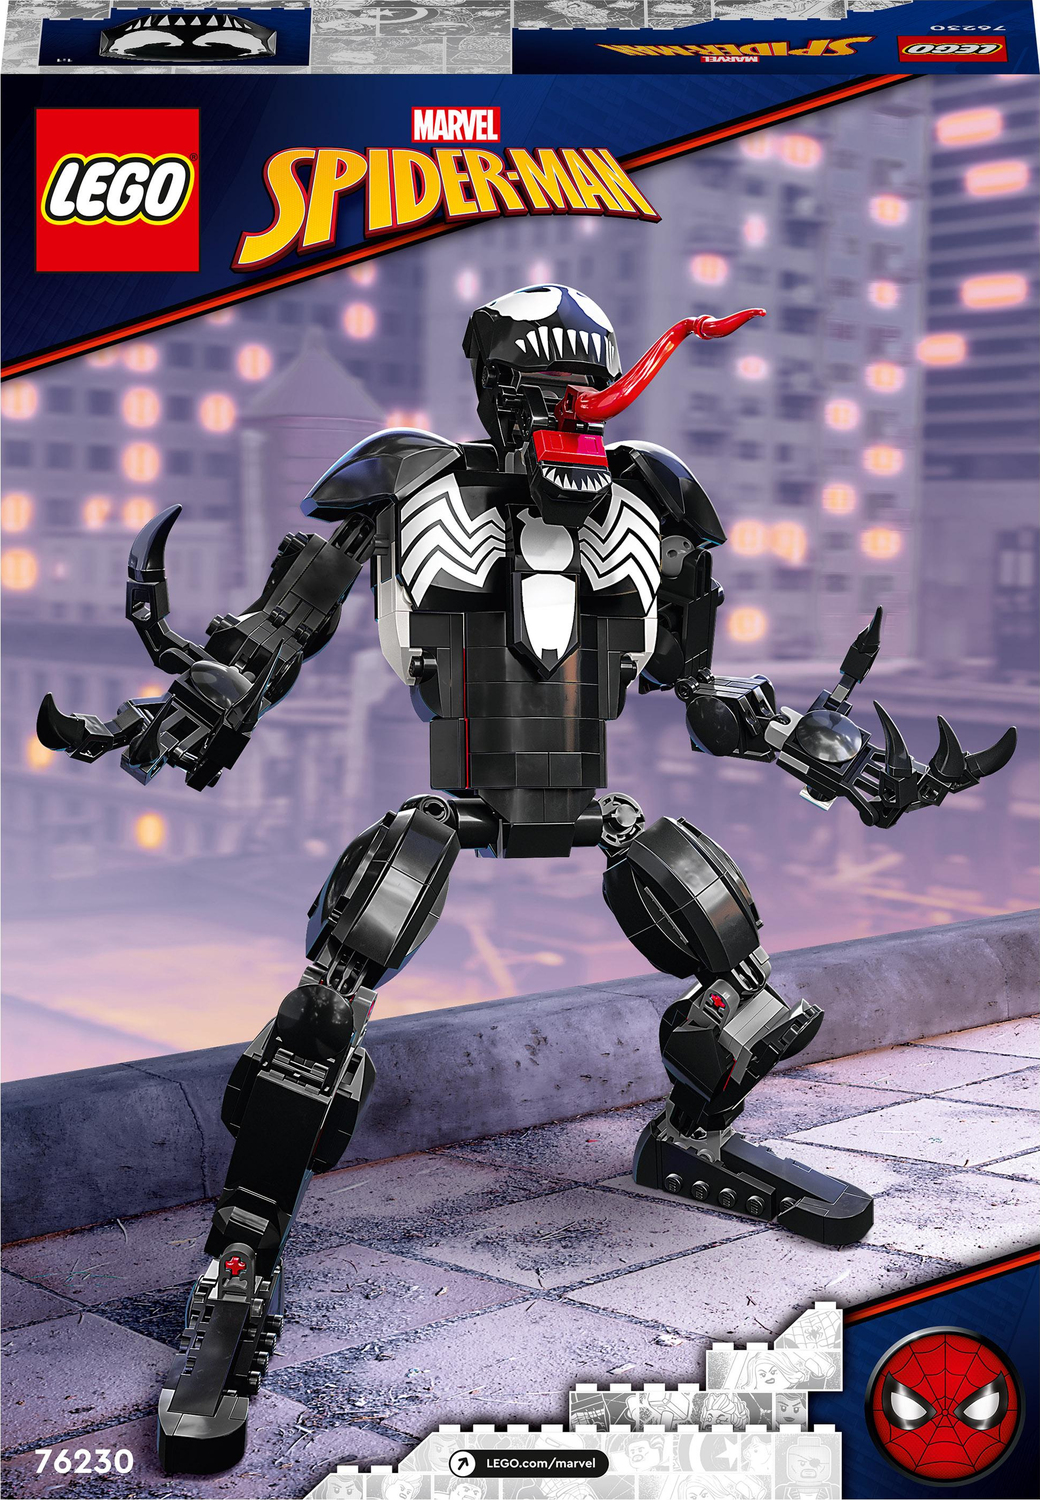  LEGO Marvel Venom Figure, 76230 Fully Articulated Super Villain  Action Toy, Spider-Man Universe Collectible Set, Alien Toys for Boys and  Girls : Toys & Games